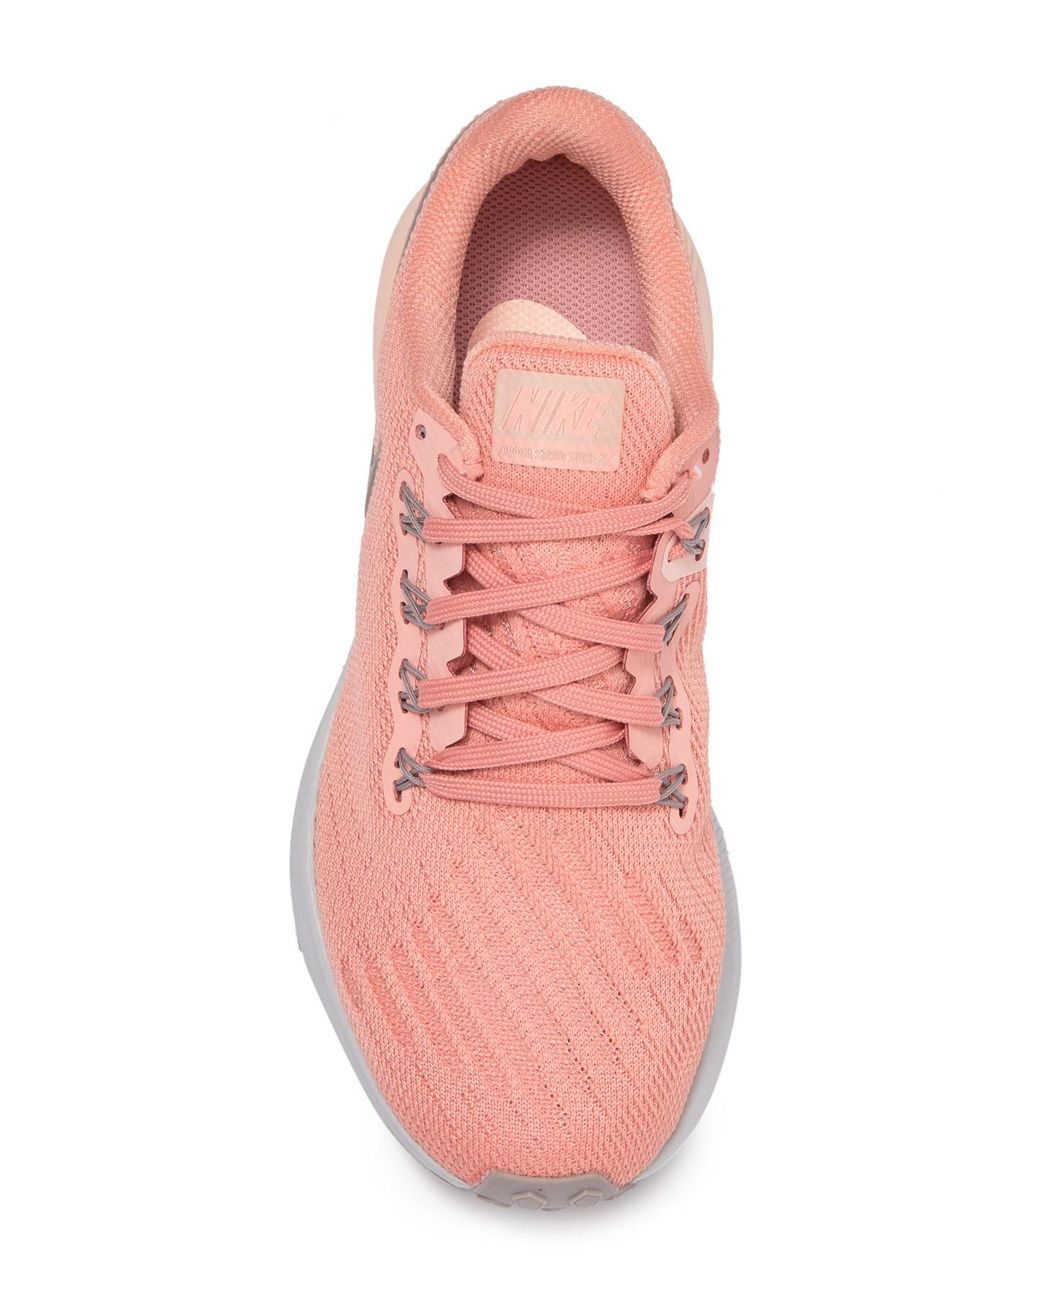 Nike Air Zoom Structure 22 Running Shoe in Pink | Lyst